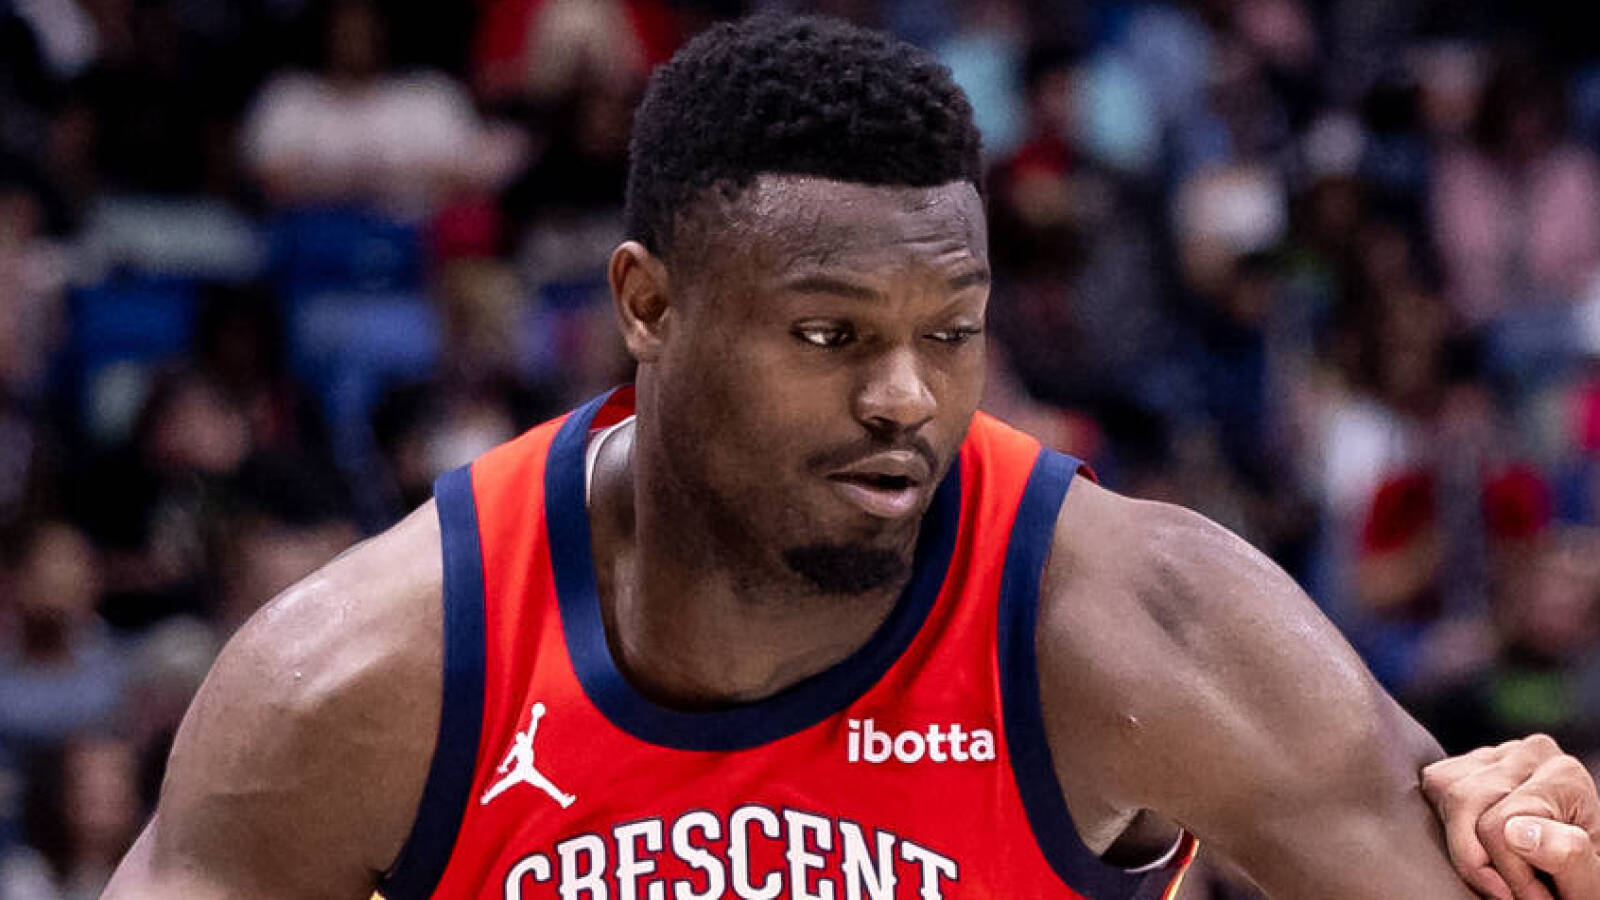 Report: Zion Williamson has lost significant weight this season